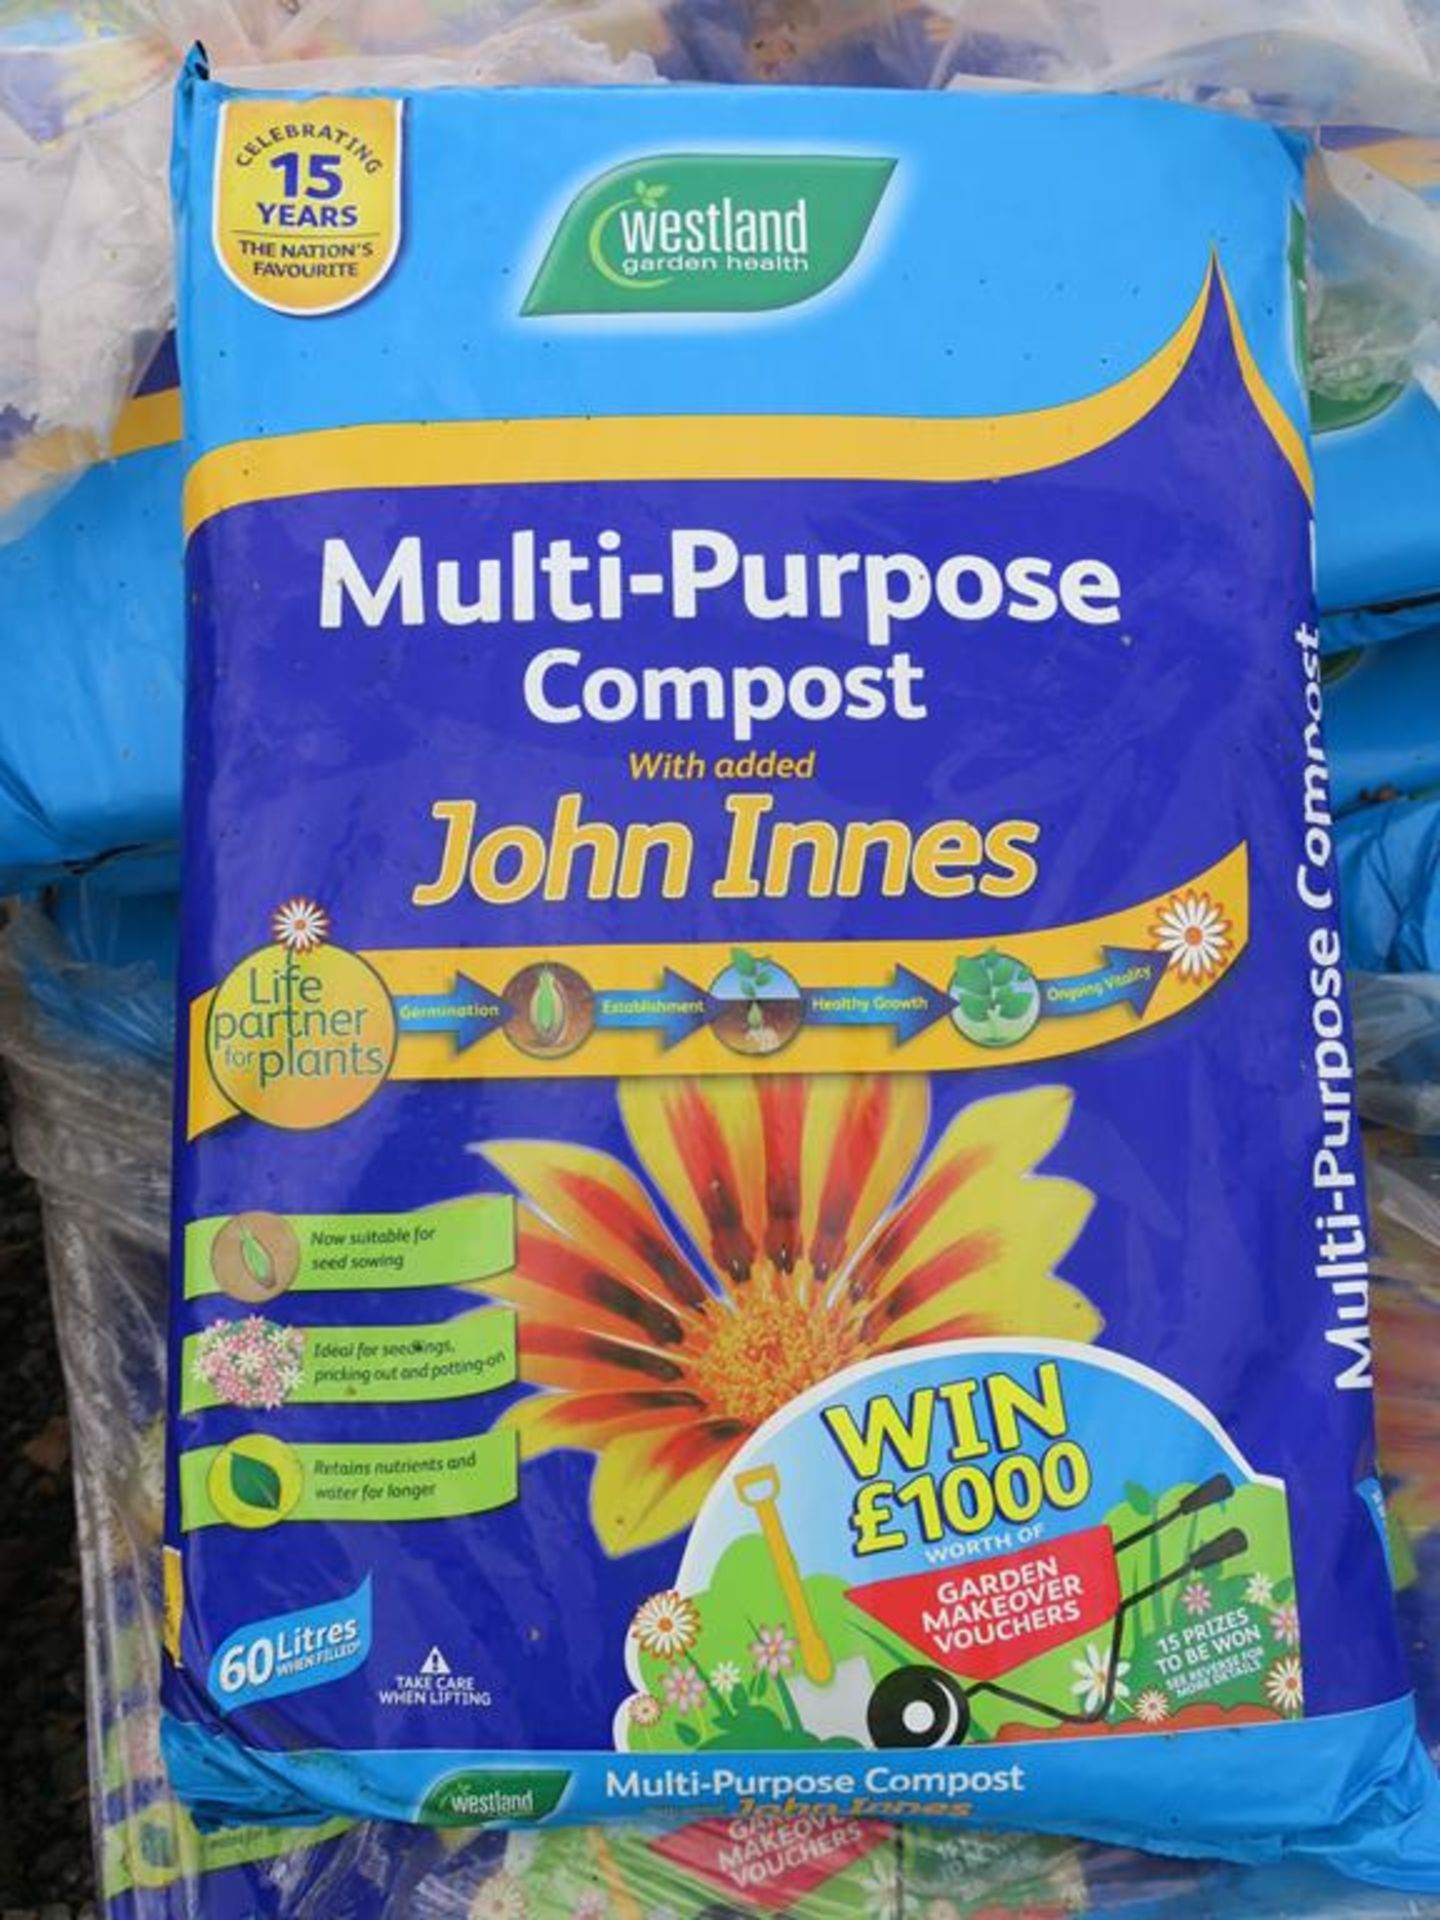 * 14 bags of Westland Multi Purpose Compost with added John Innes Compost (60L bags)